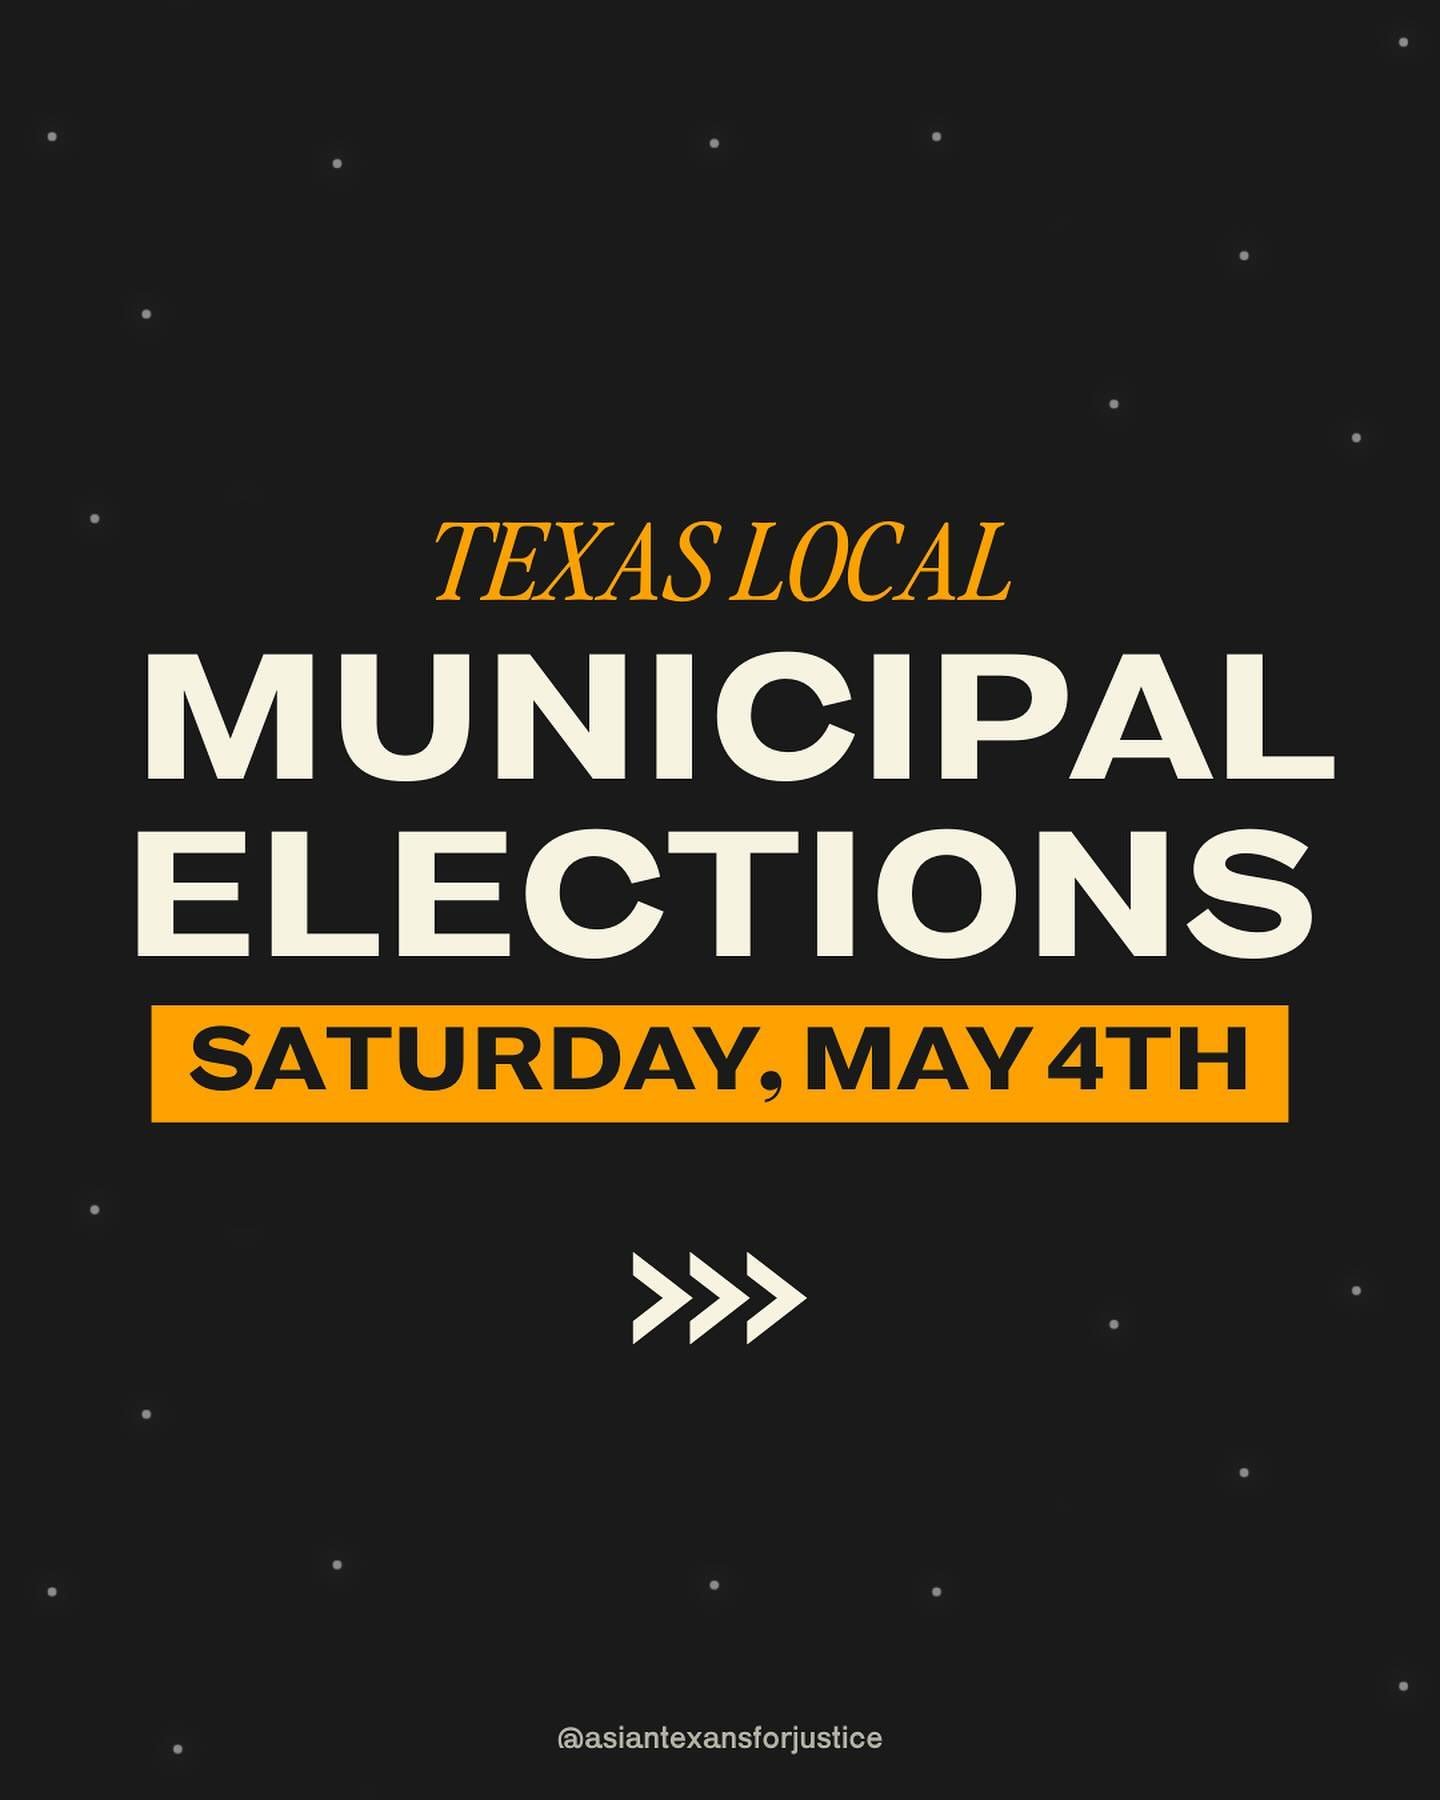 DID YOU KNOW? 💫 Texas has local municipal elections in May! From city council to school boards to propositions to bonds, every choice you make will impact our community&rsquo;s destiny.

Your voice matters&mdash;let&rsquo;s use it to shape a better 